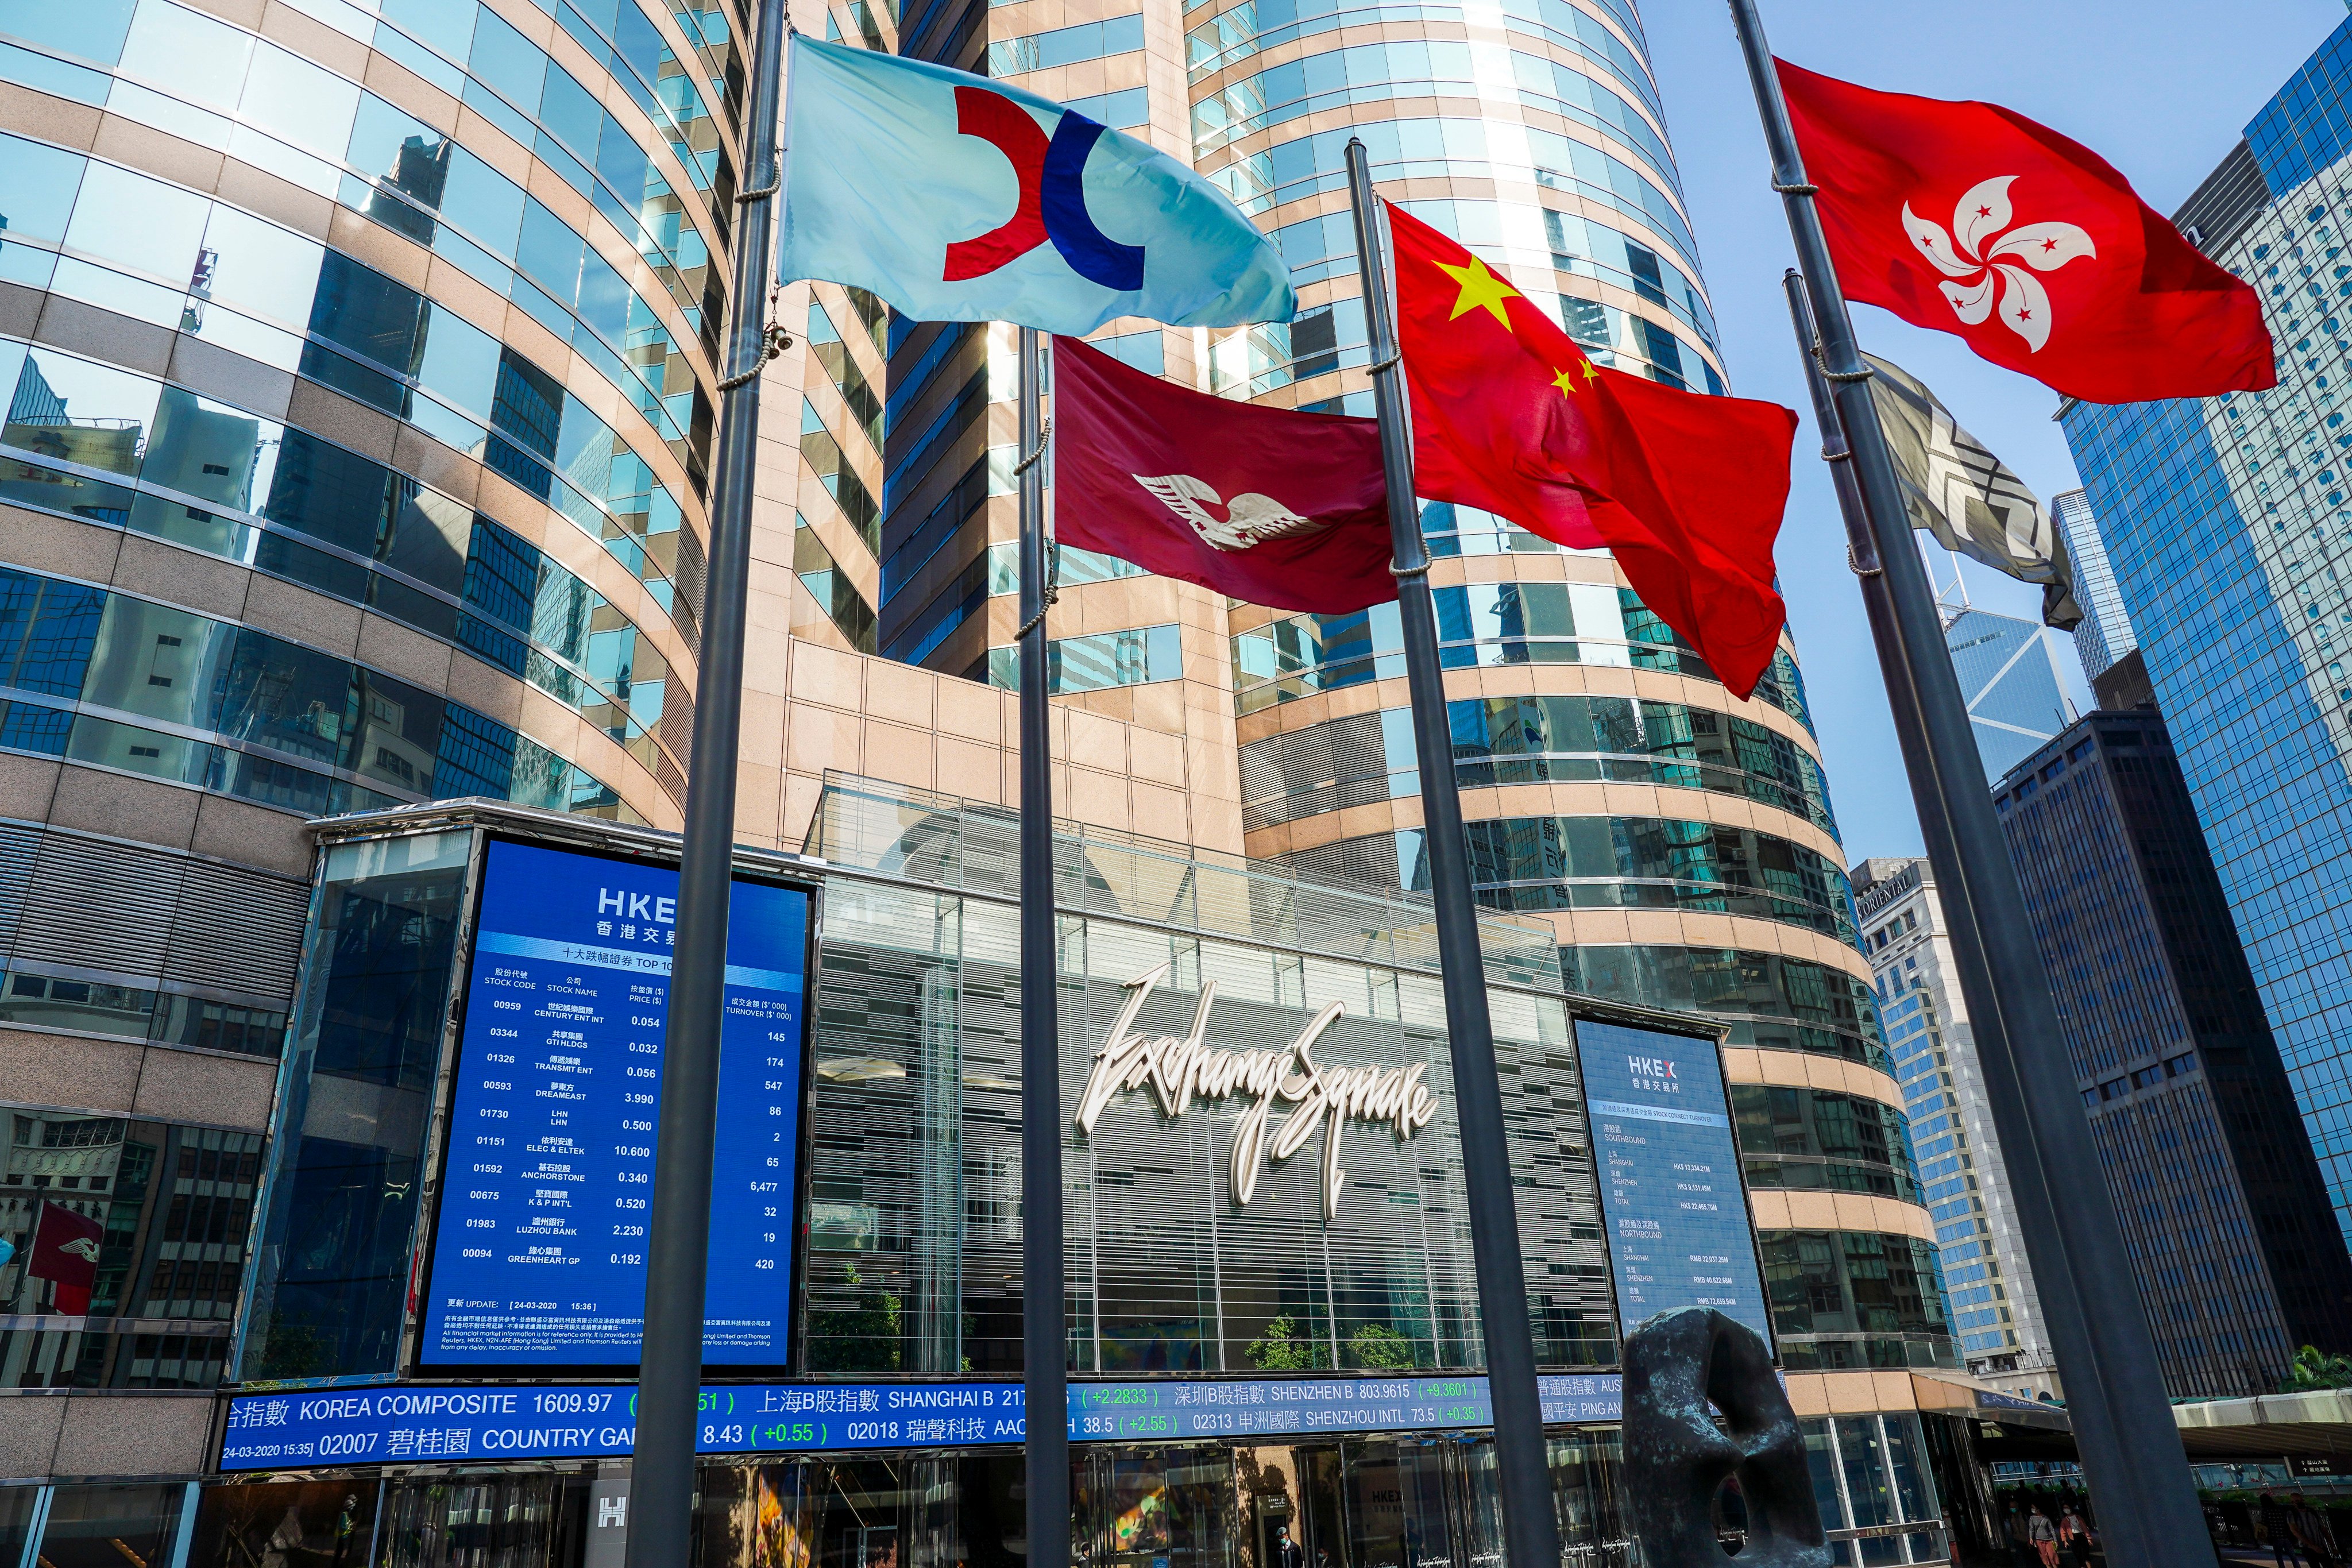 PwC expects some 80 companies to list in Hong Kong this year, raising a total of HK$80 billion, much lower than its previous estimate of HK$100 billion. Photo: Robert Ng